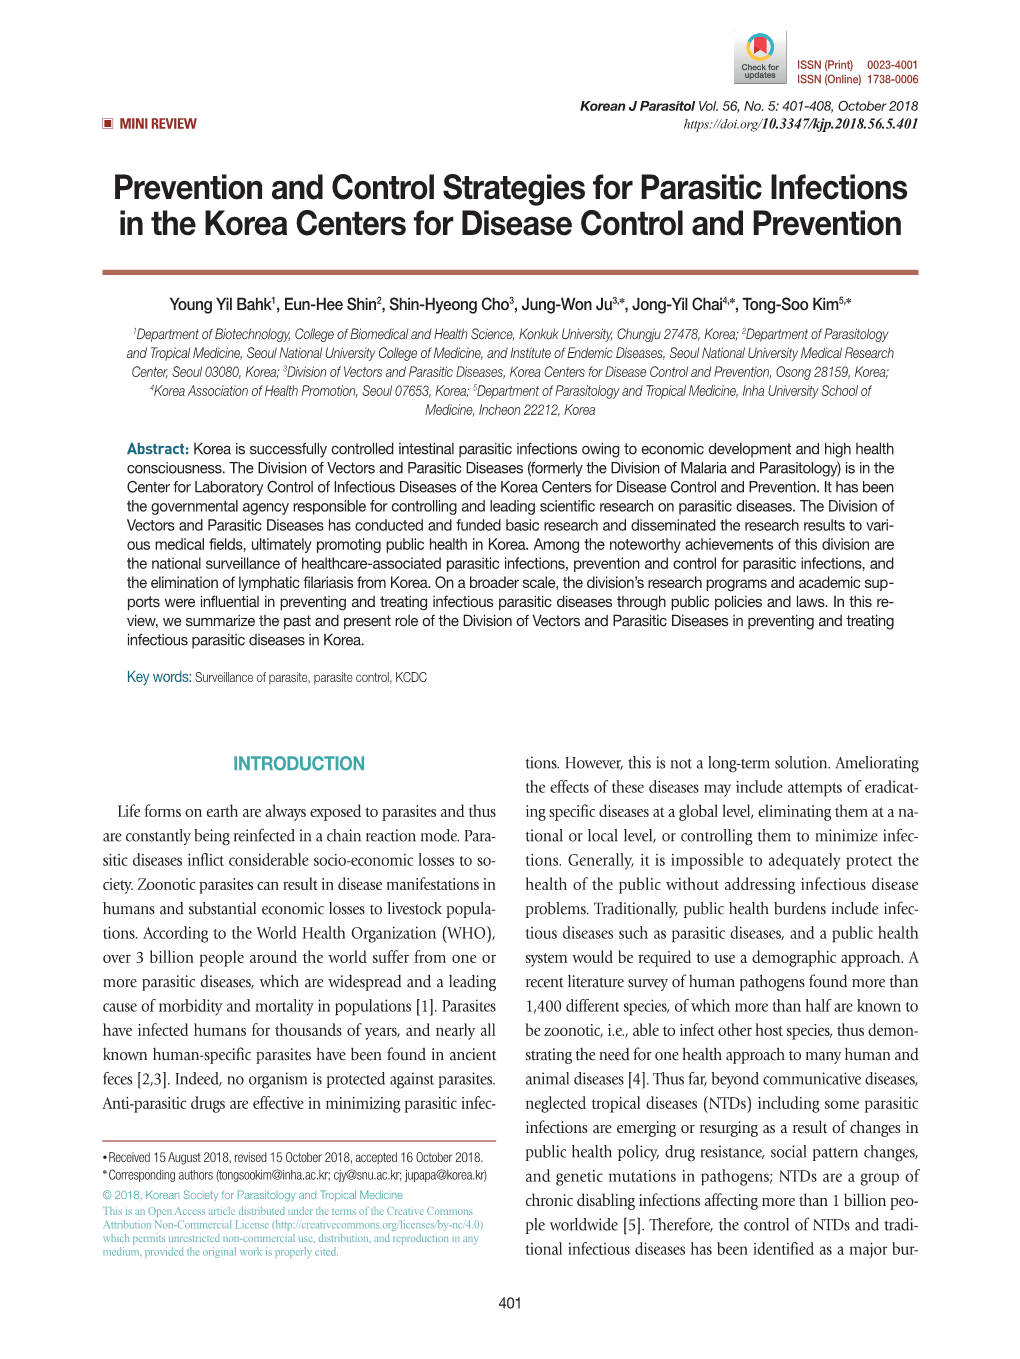 Prevention and Control Strategies for Parasitic Infections in the Korea Centers for Disease Control and Prevention